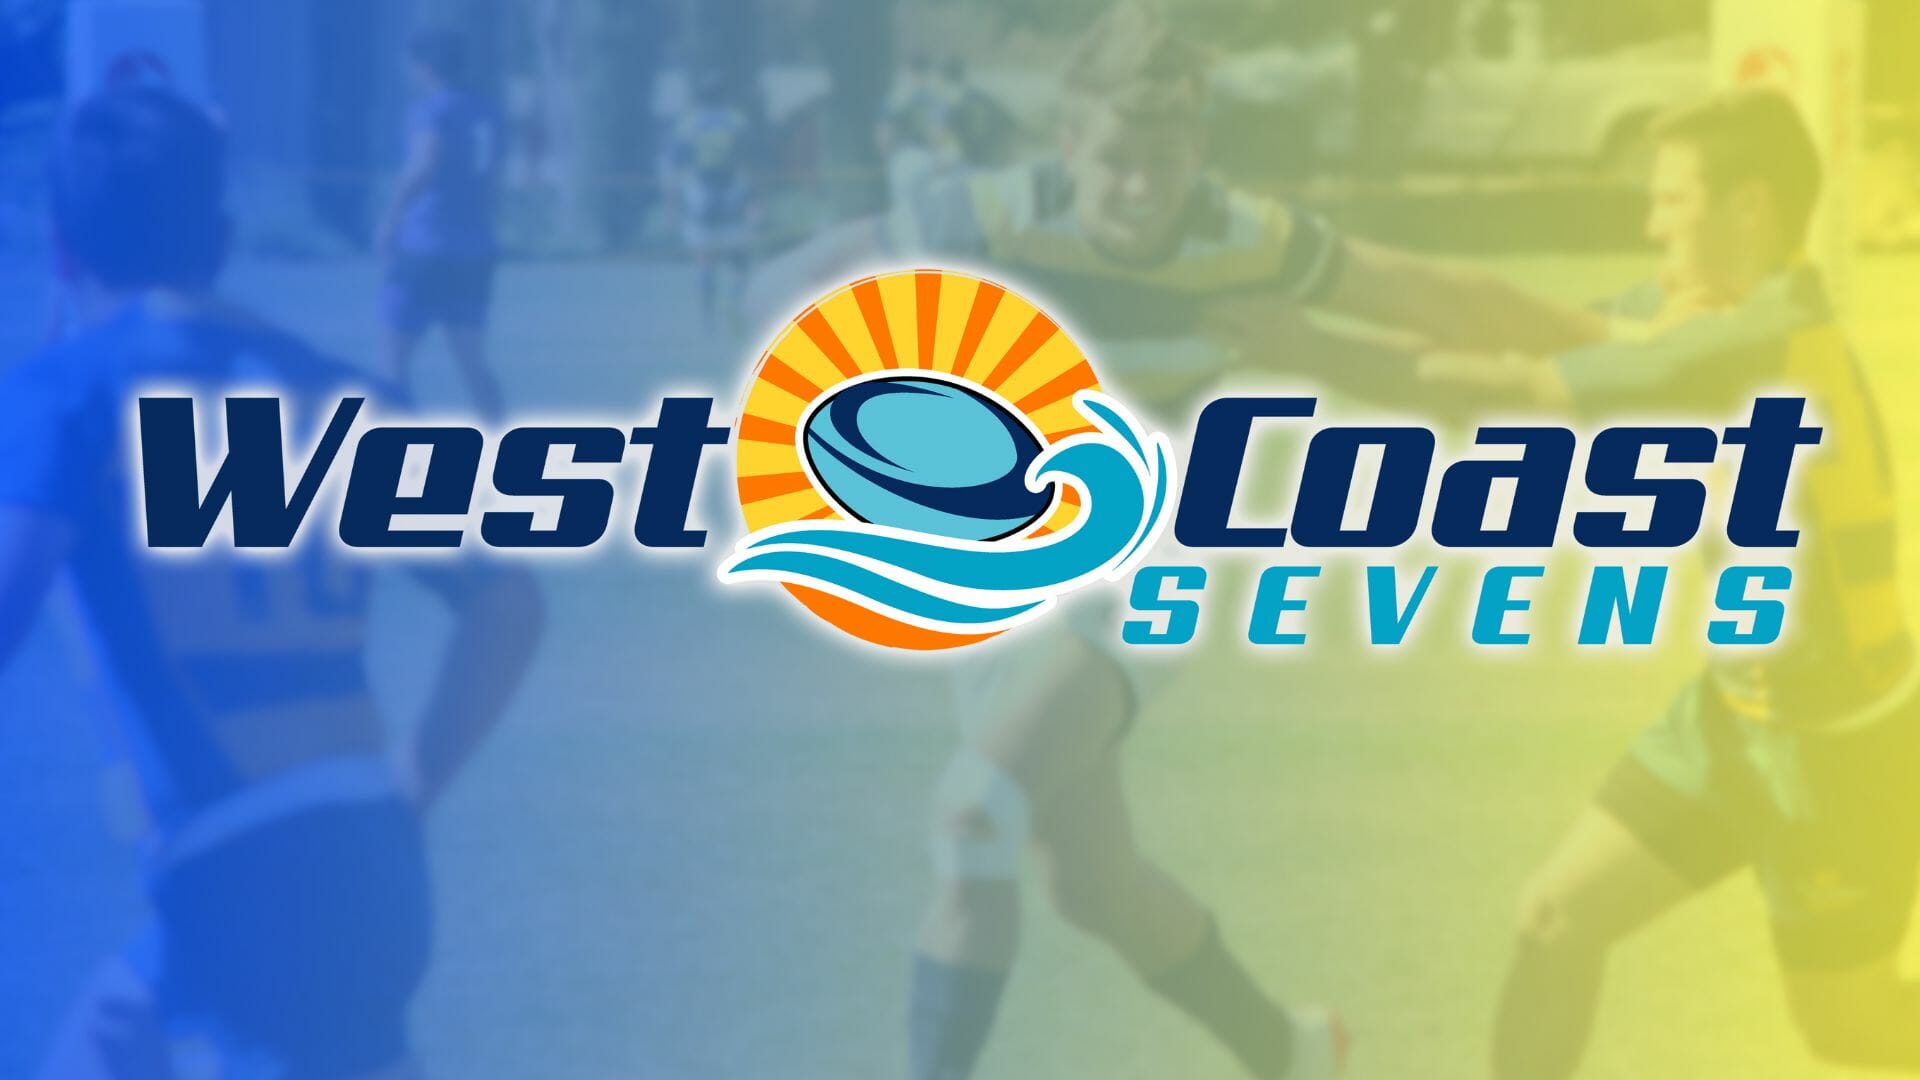 West Coast Sevens Rugby